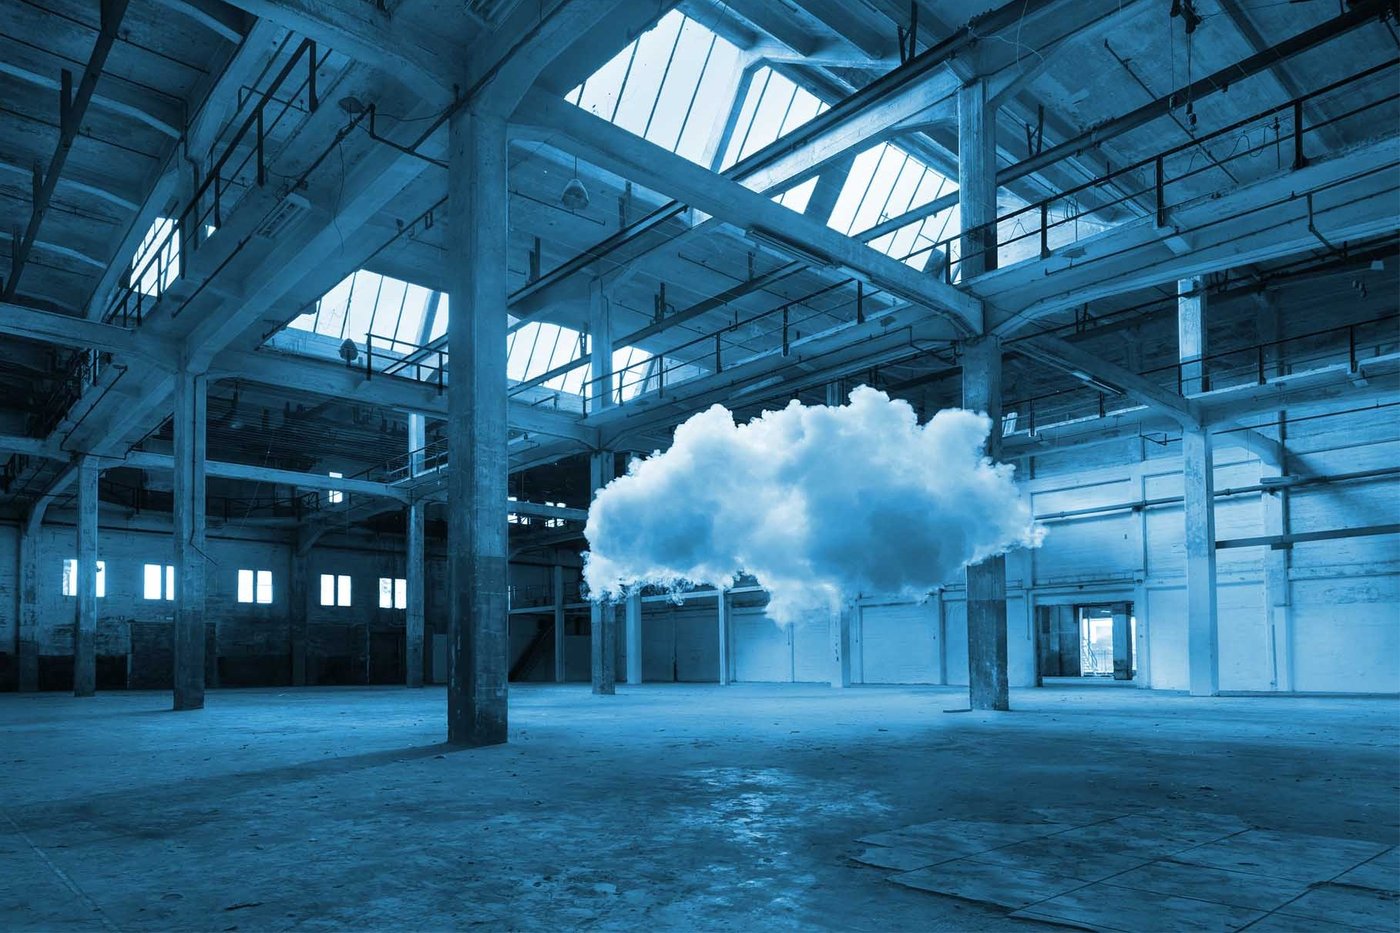 Cloud floating in a warehouse in blue